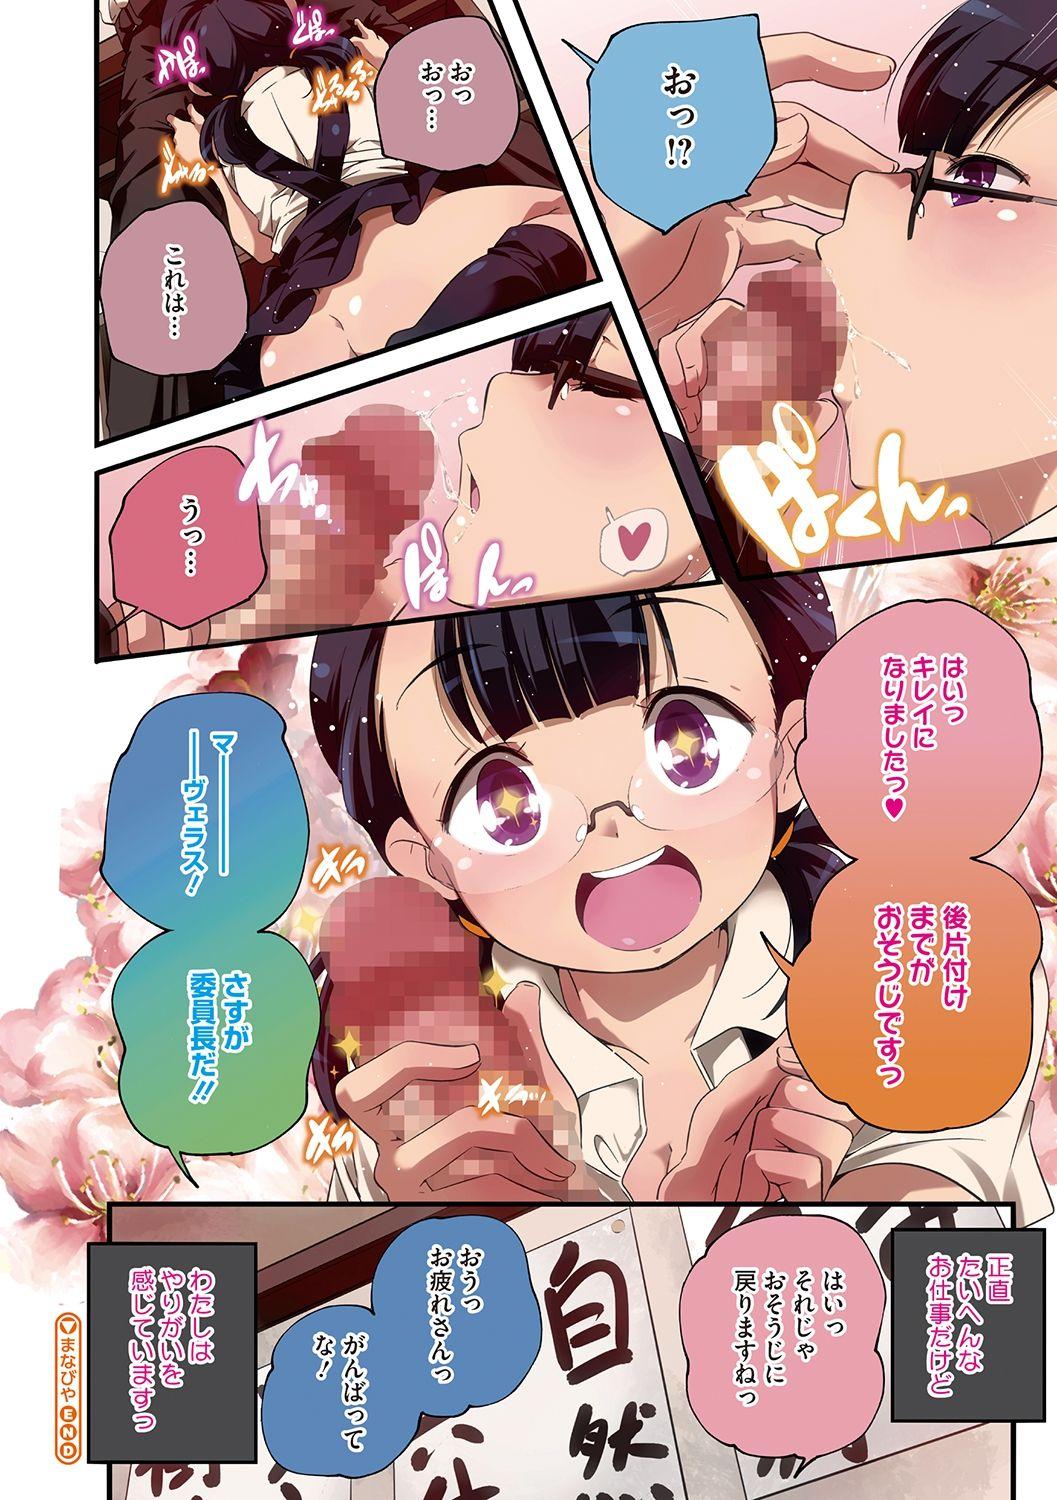 Mamadas [Anthology] LQ -Little Queen- Vol. 35 [Digital] Young - Page 6